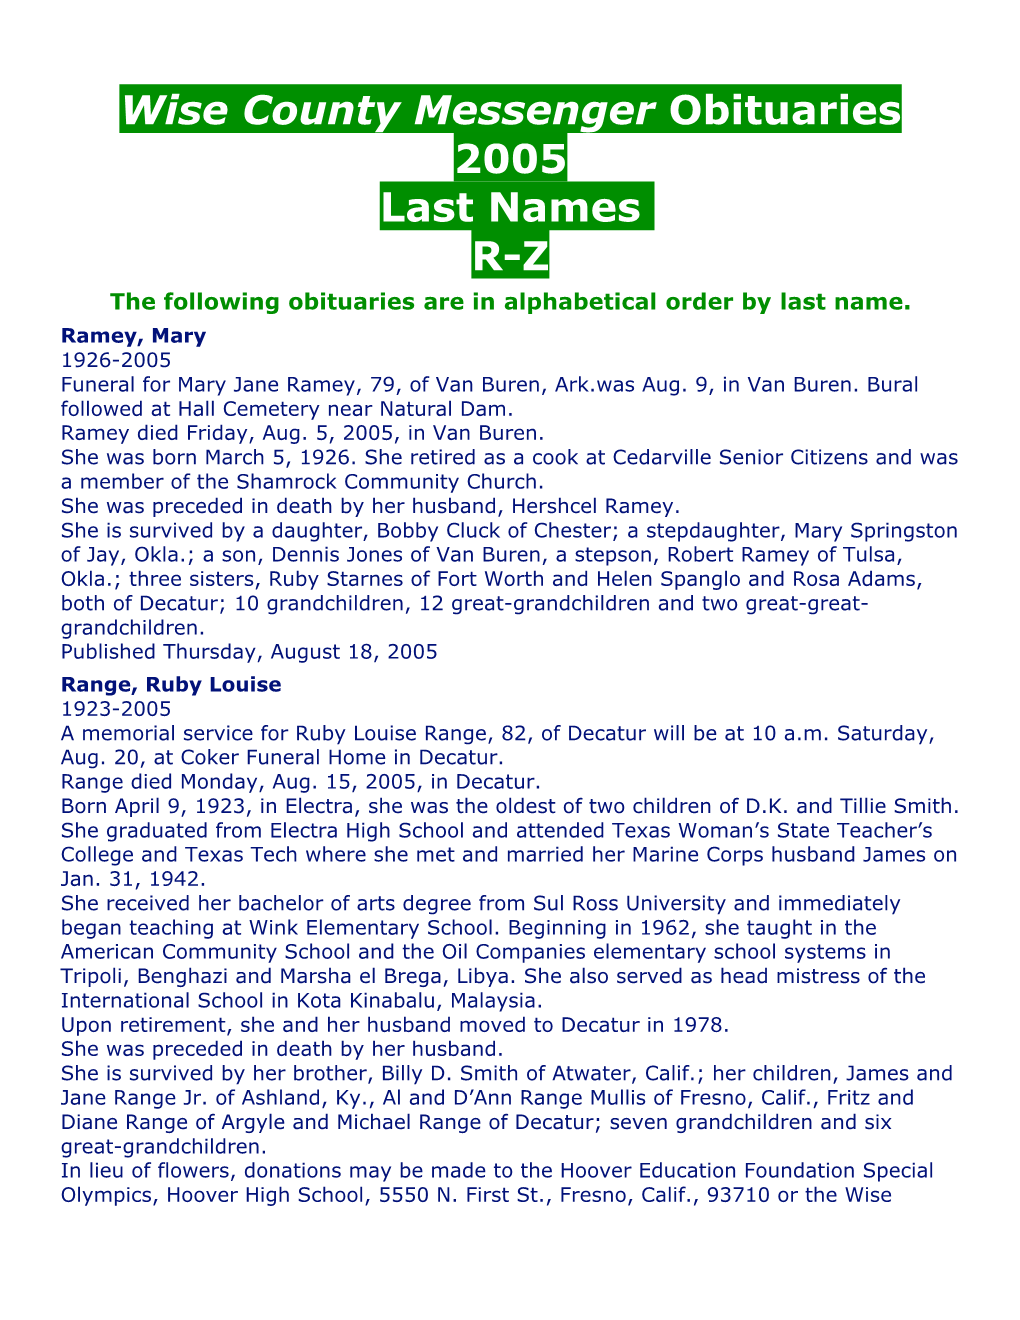 Wise County Messenger Obituaries 2005 Last Names R-Z the Following Obituaries Are in Alphabetical Order by Last Name